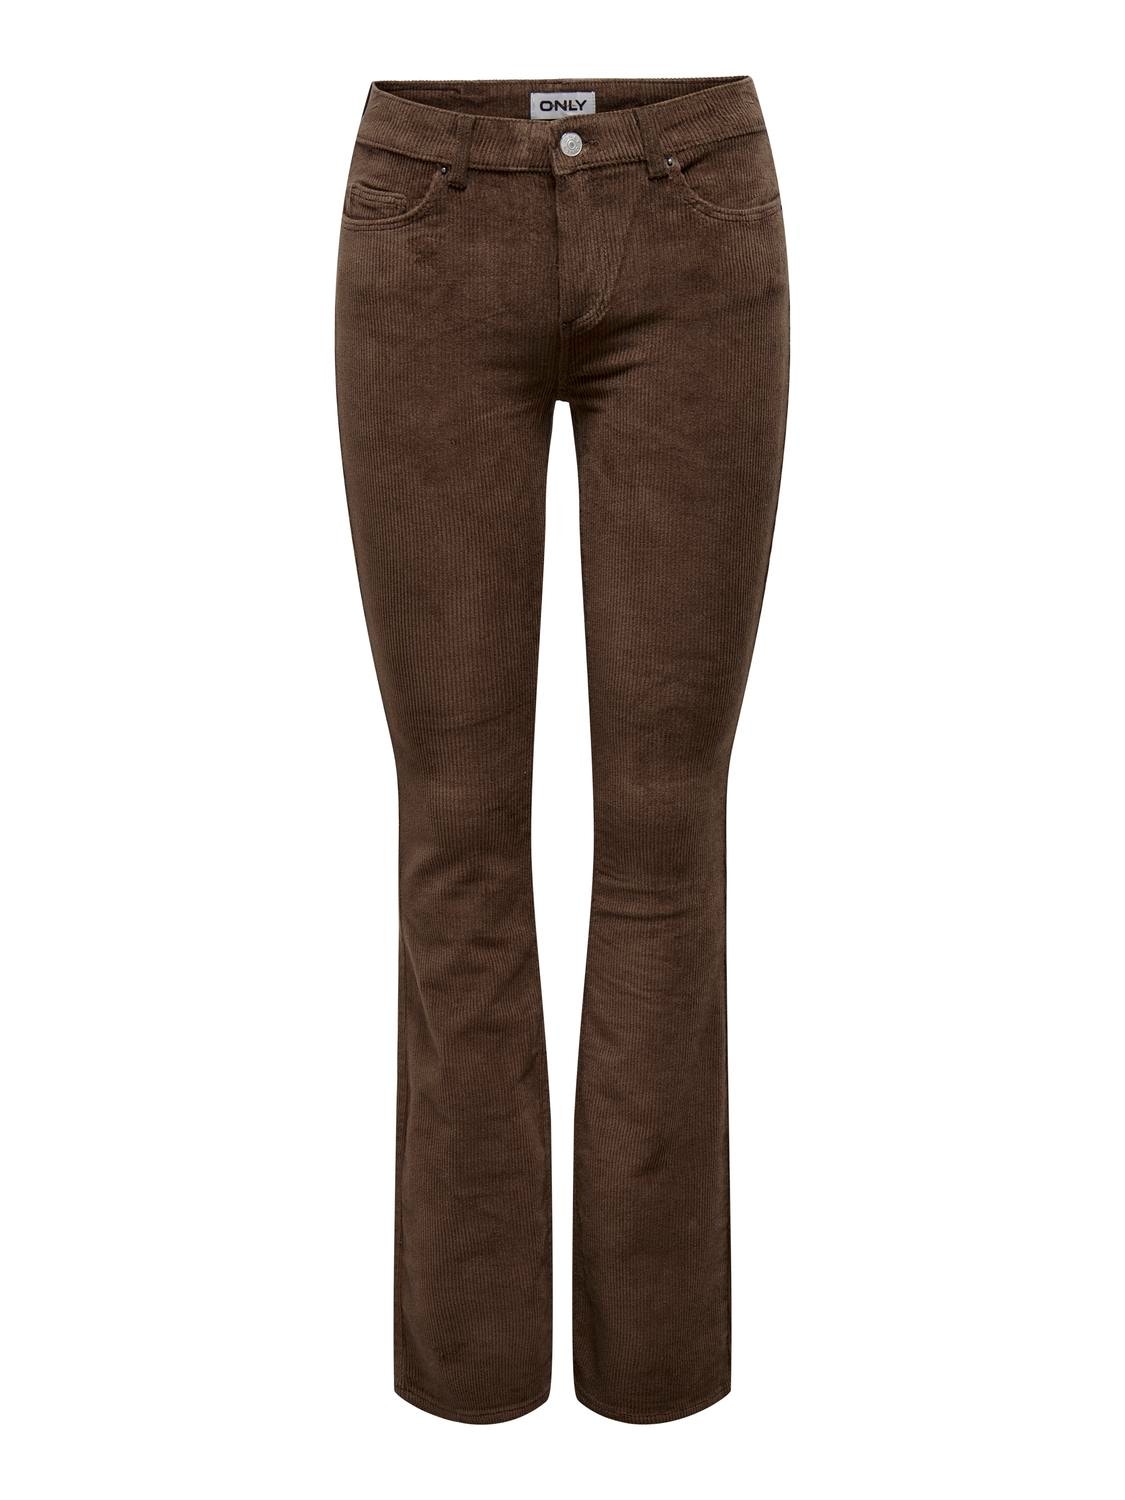 https://images.only.com/15304256/4375681/001/only-sweetflaredcorduroytrousers-brown.jpg?v=ec22a0fdbbce87119076edab6c1b675c&format=webp&width=1280&quality=90&key=25-0-3